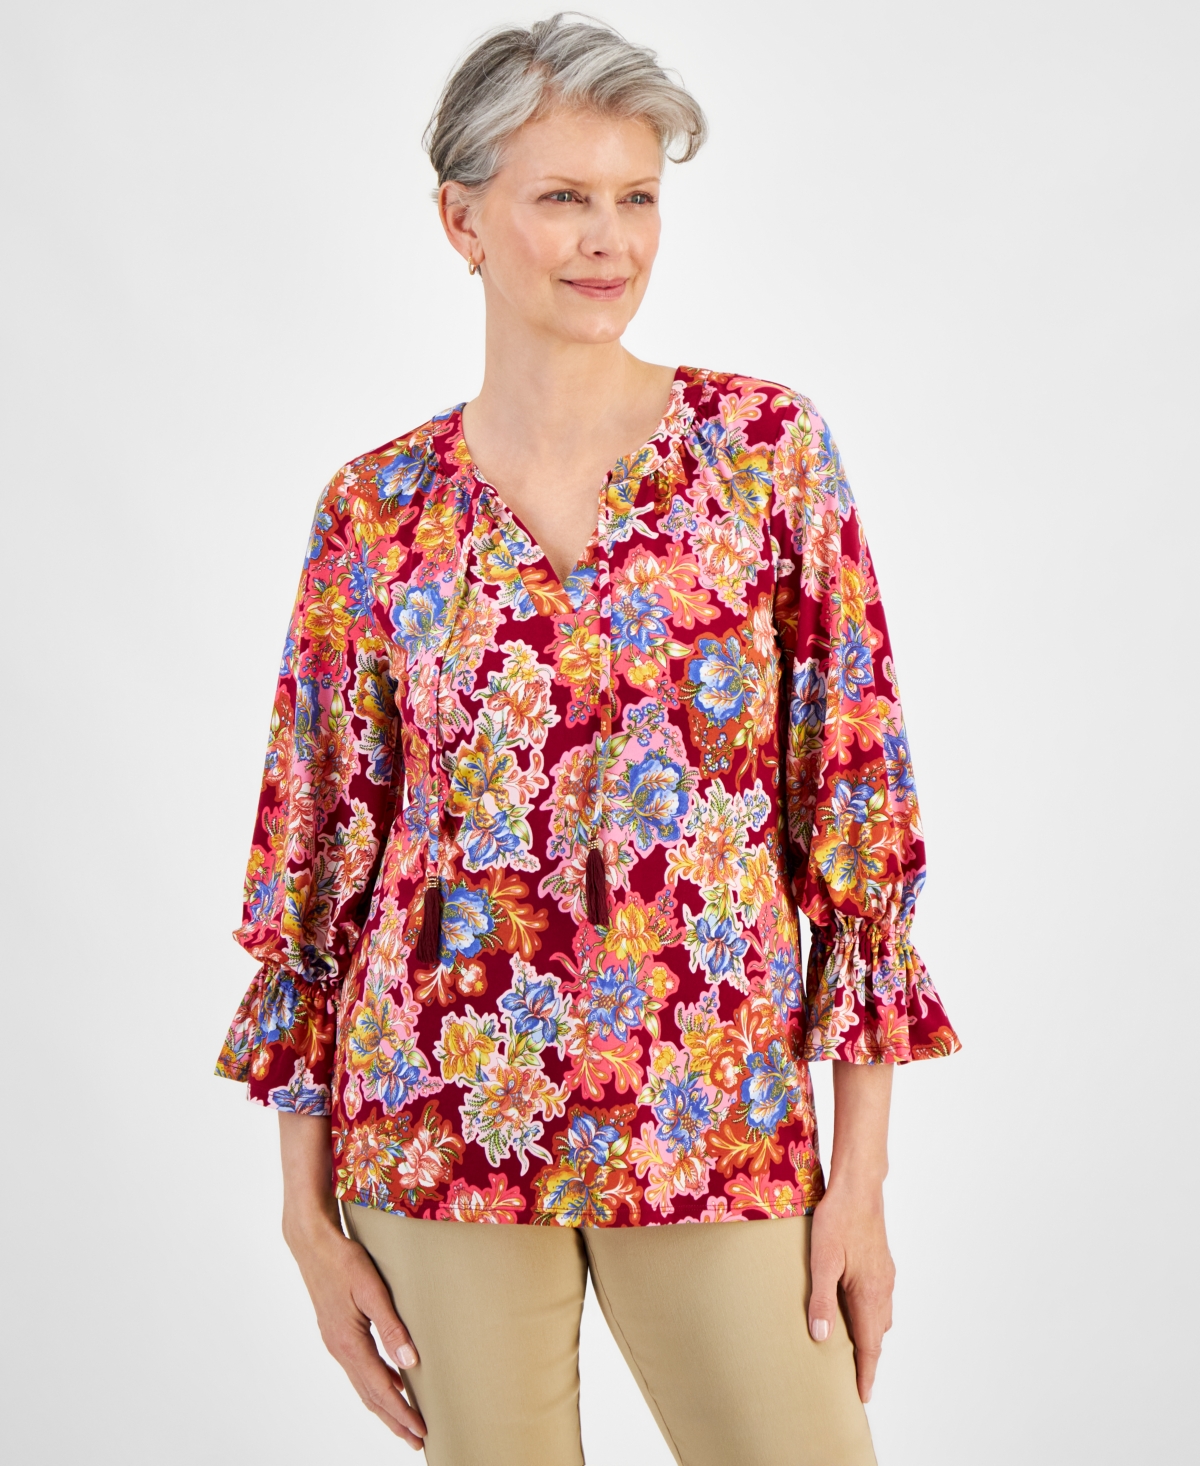 Women's Floral Print 3/4 Sleeve Ruffled-Cuff Top, Created for Macy's - Ruby Slippers Combo